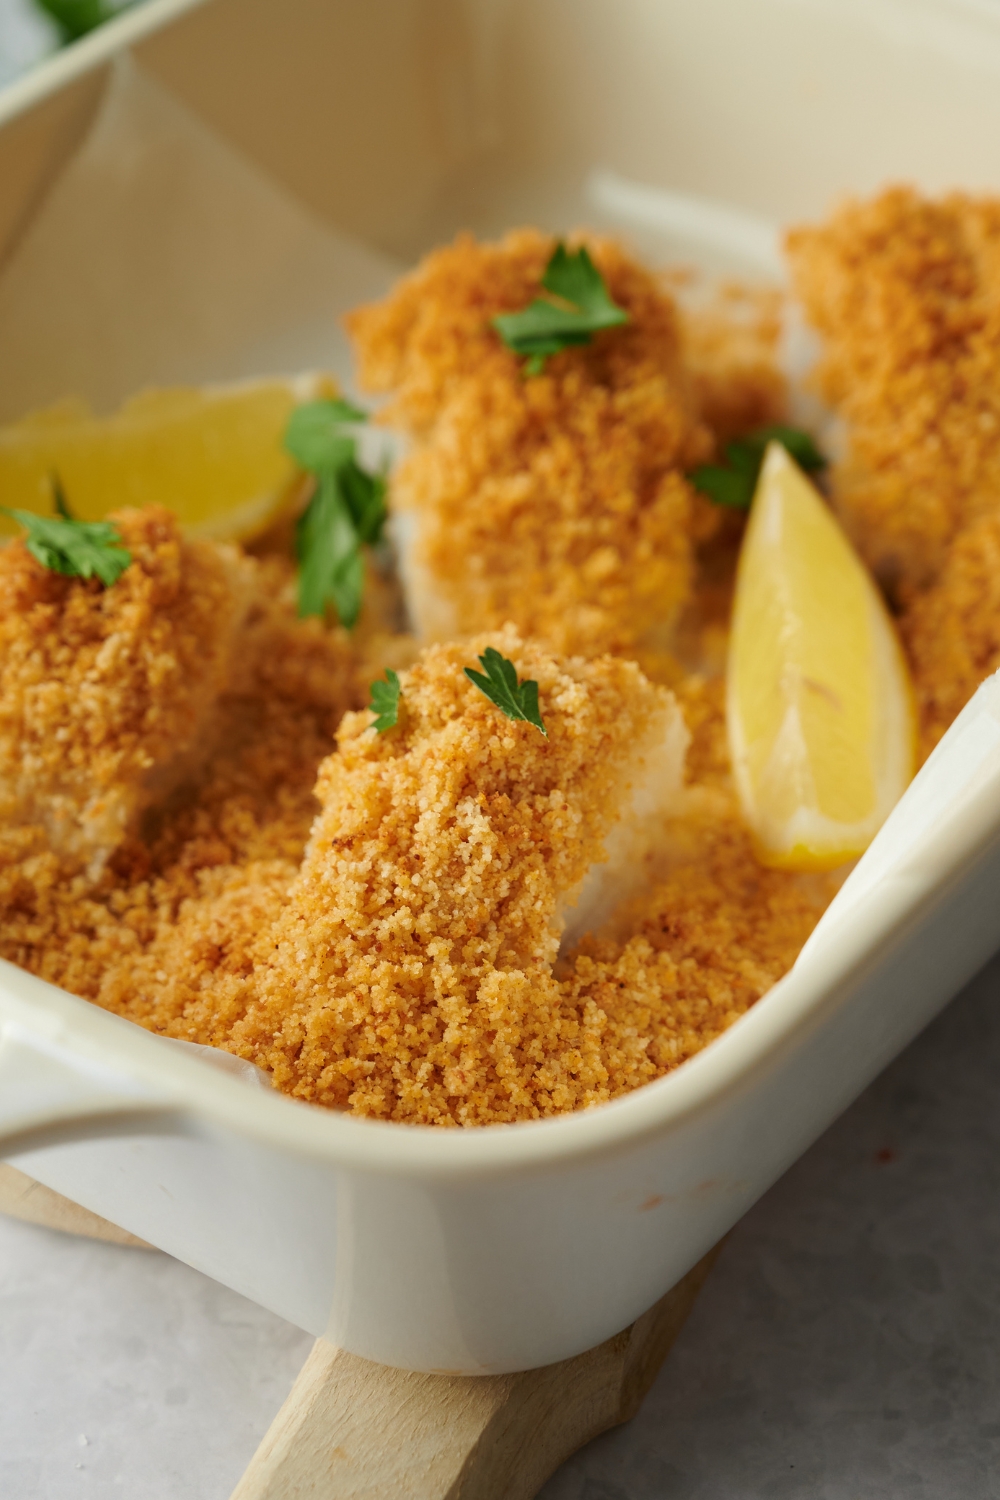 A piece of breaded haddock in a baking dish with more pieces of the breaded haddock.